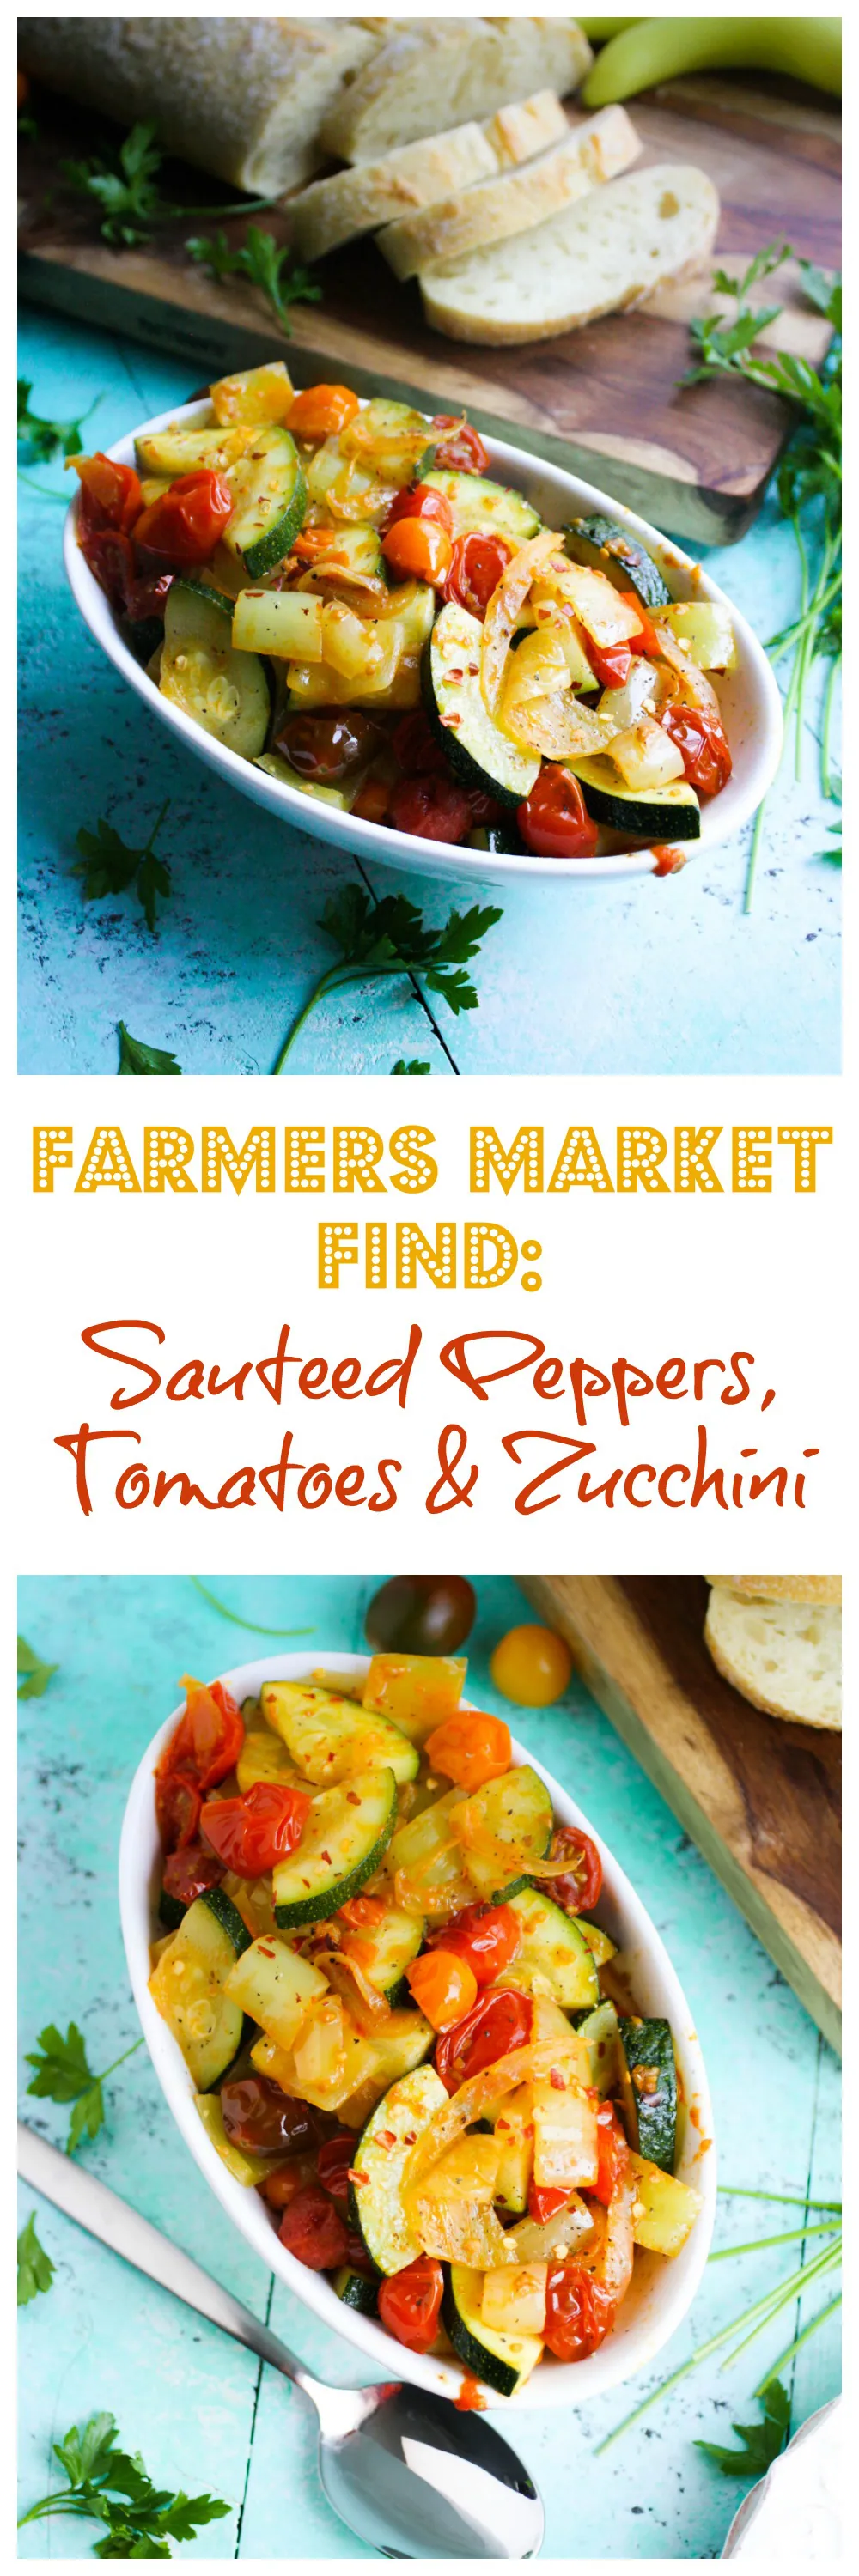 Farmers Market Find: Sautéed Peppers, Tomatoes & Zucchini is a flavorful side dish or appetizer for the season. Farmers Market Find: Sautéed Peppers, Tomatoes & Zucchini is a side dish you'll love for the summer months.